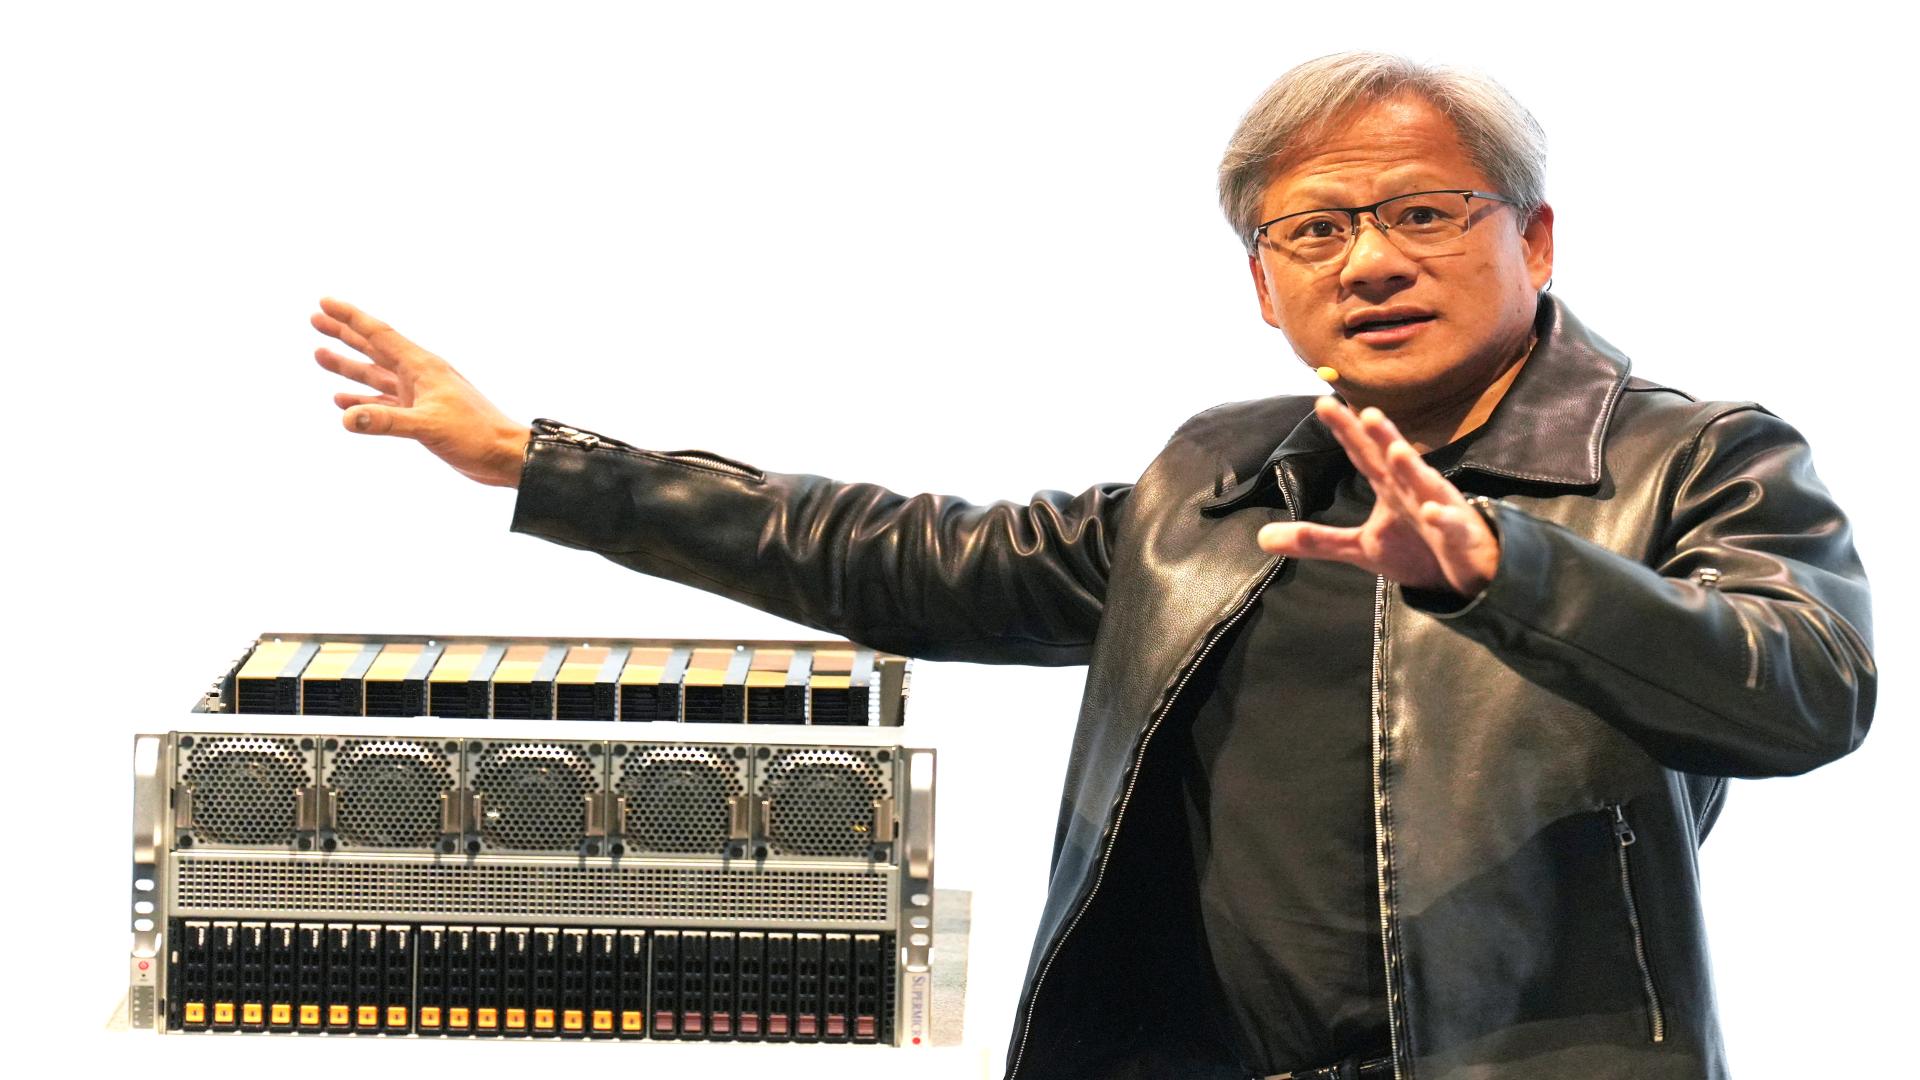 Nvidia's A.I.-driven stock surge pushed earnings multiple three times higher than Tesla's